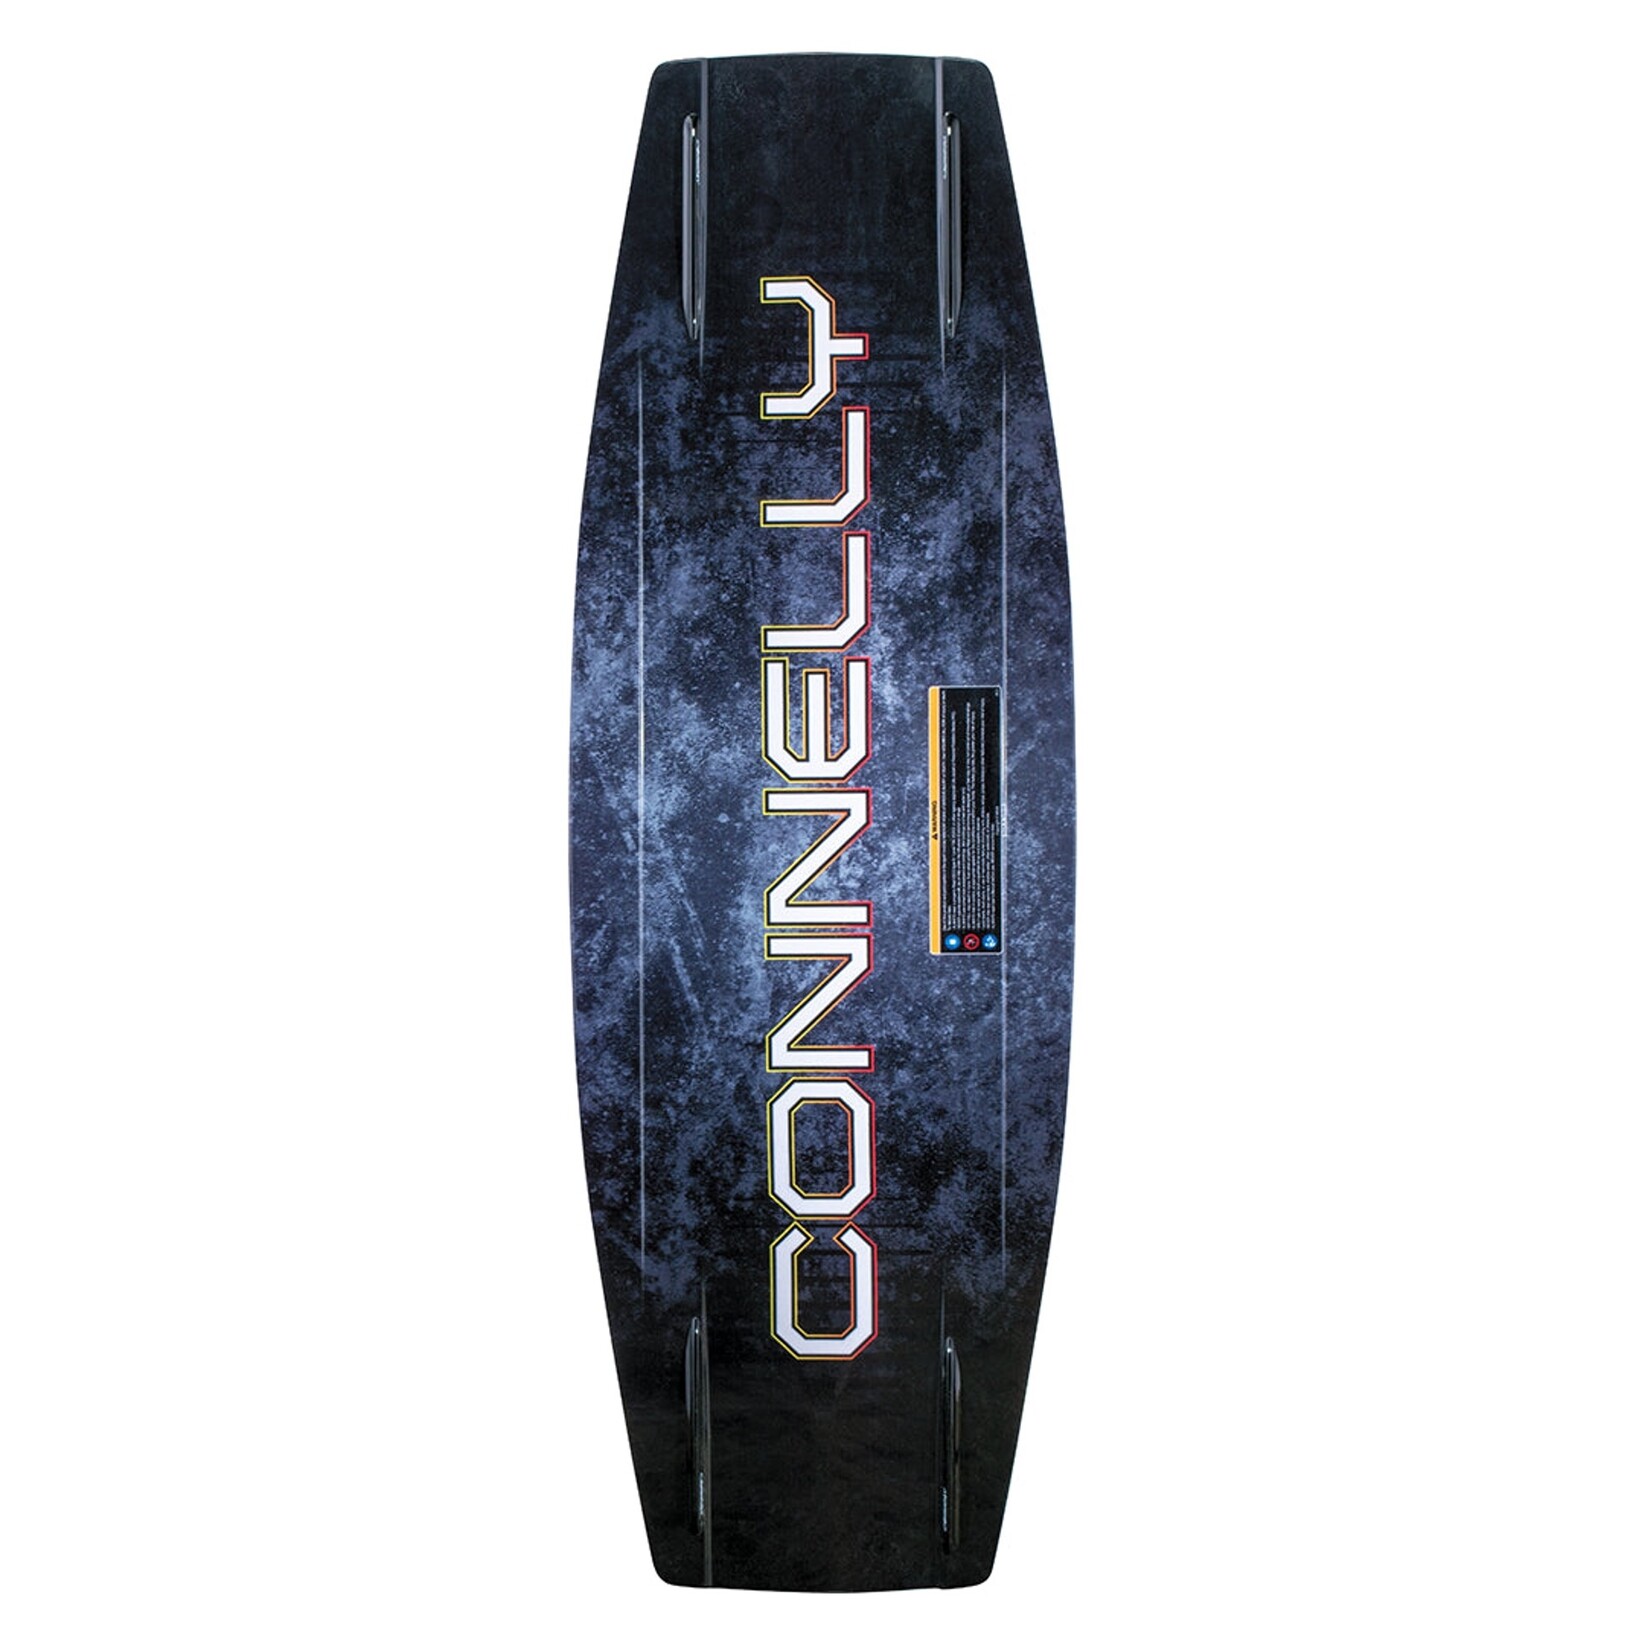 Connelly 2022 Standard 143cm